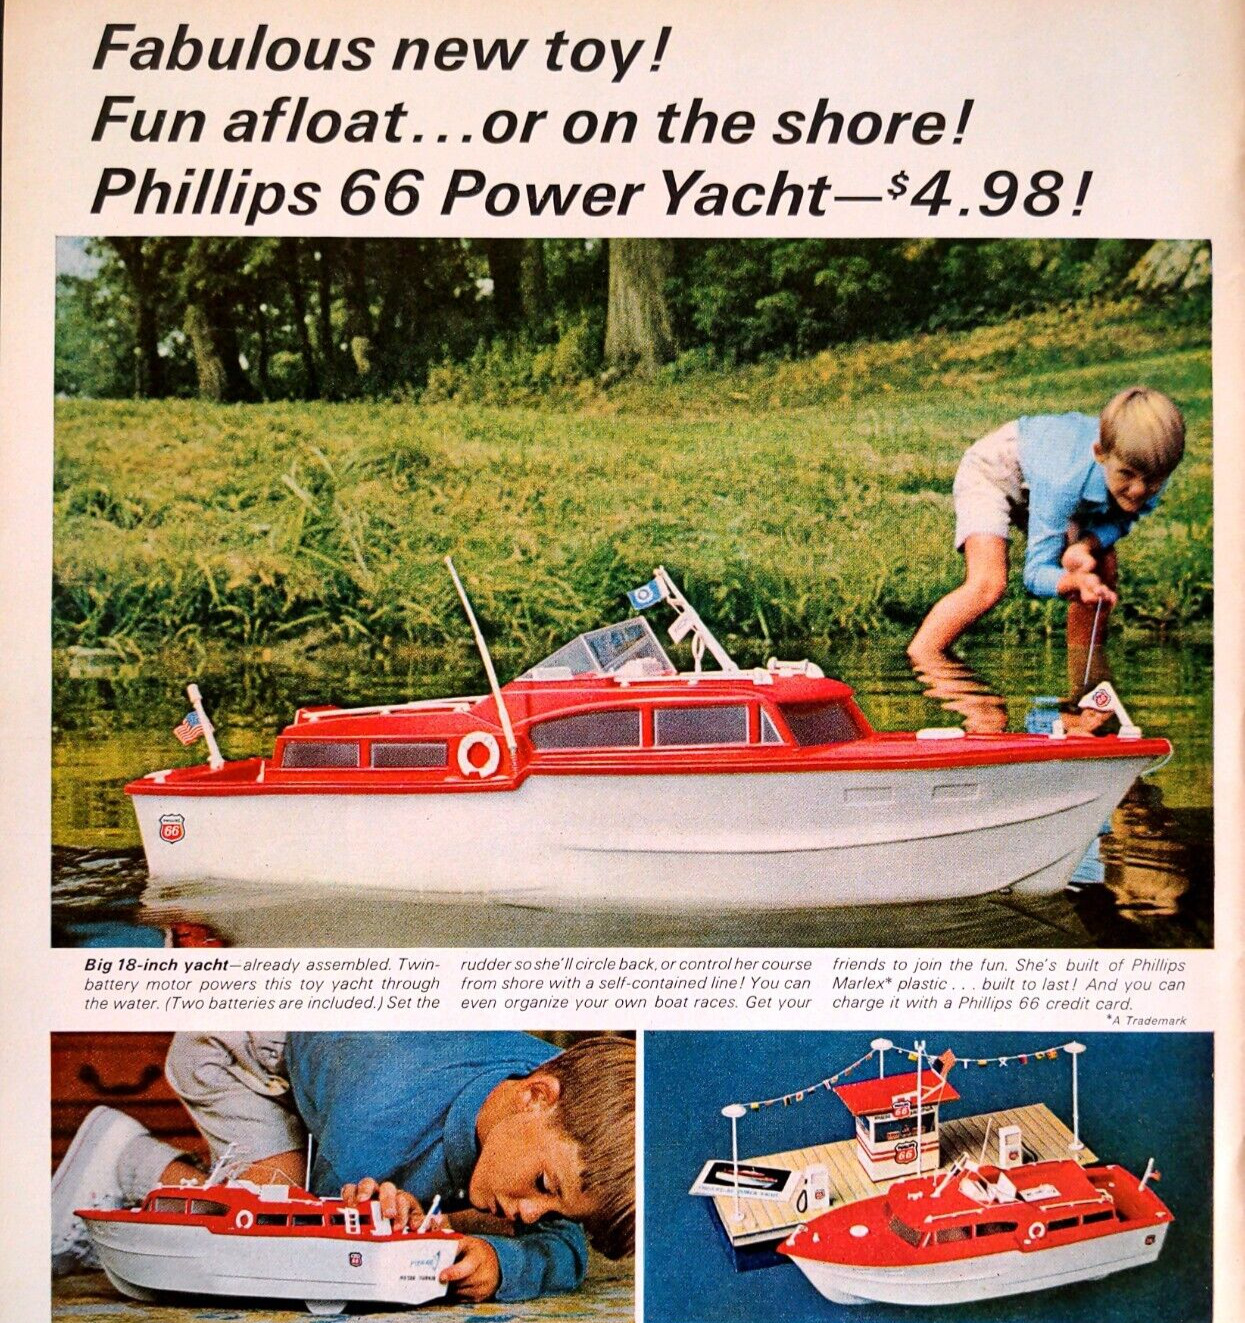 1965 Phillips 66 Print Ad Power Yacht Toy Promotion 18 Inch Twin Battery Motor